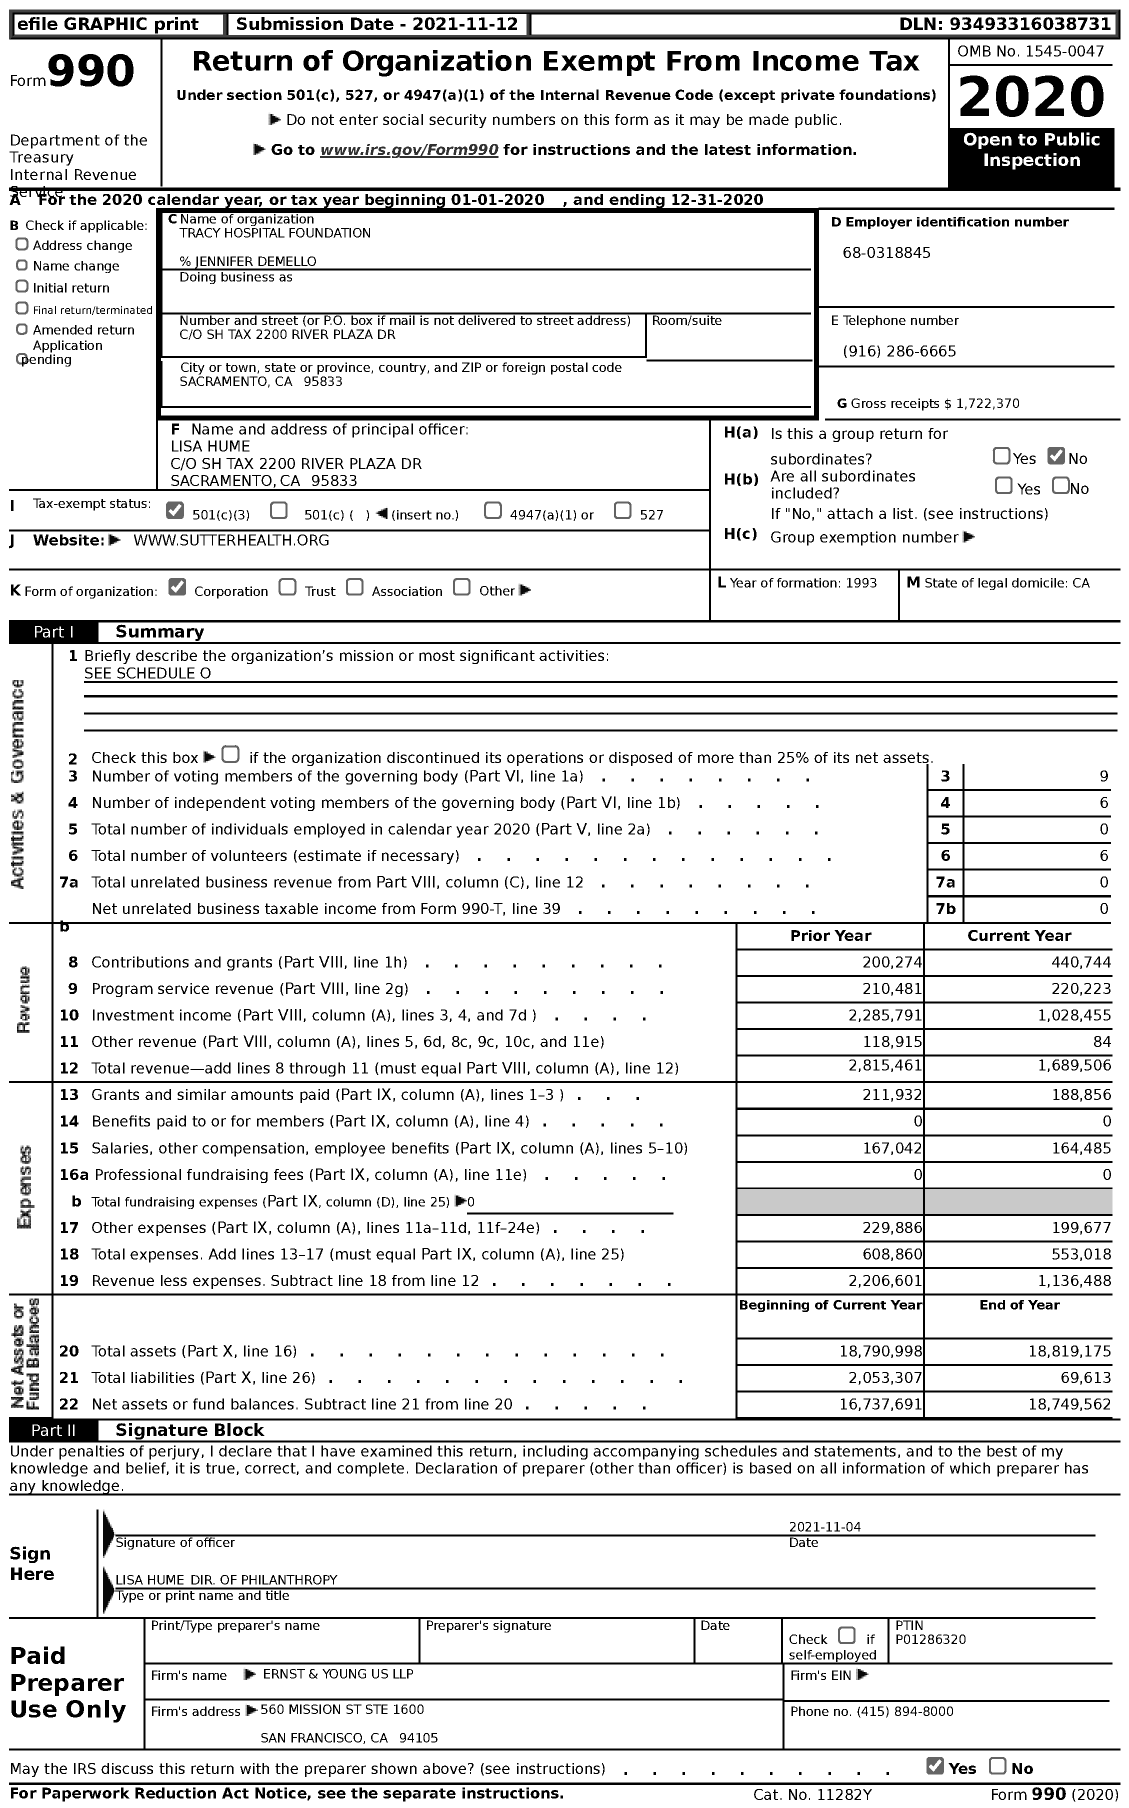 Image of first page of 2020 Form 990 for Tracy Hospital Foundation